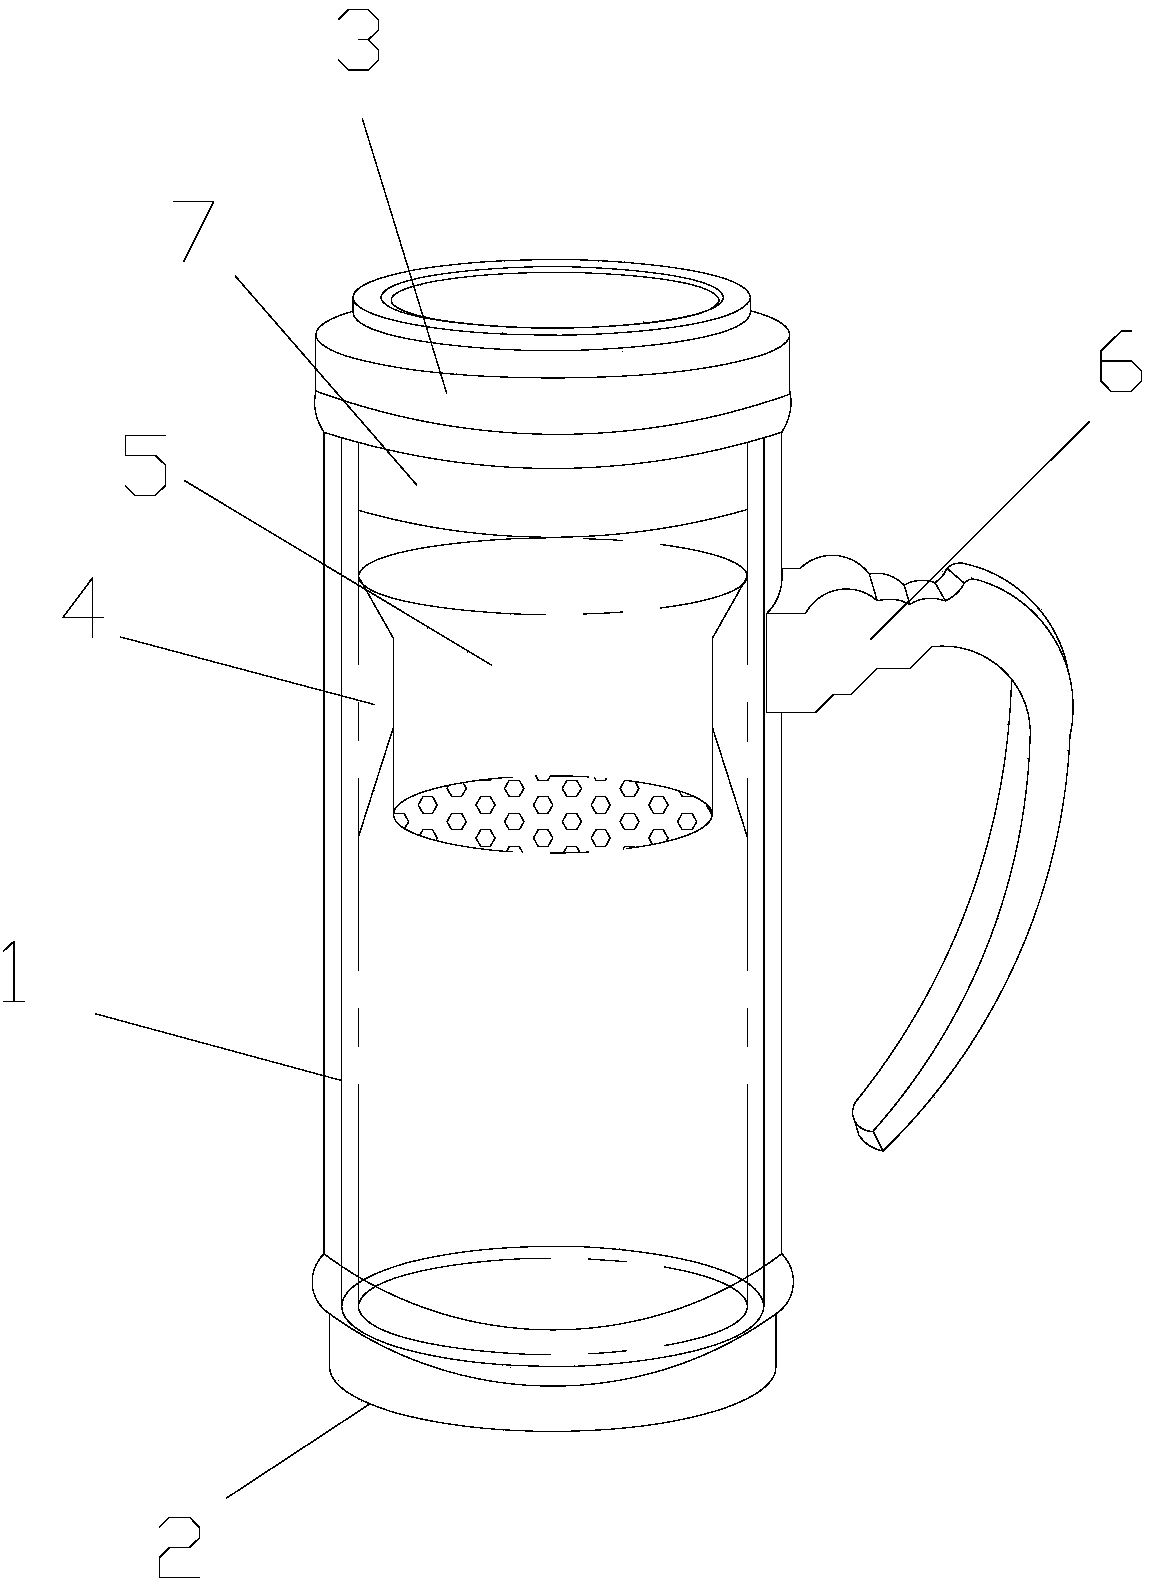 A far-infrared functional cup